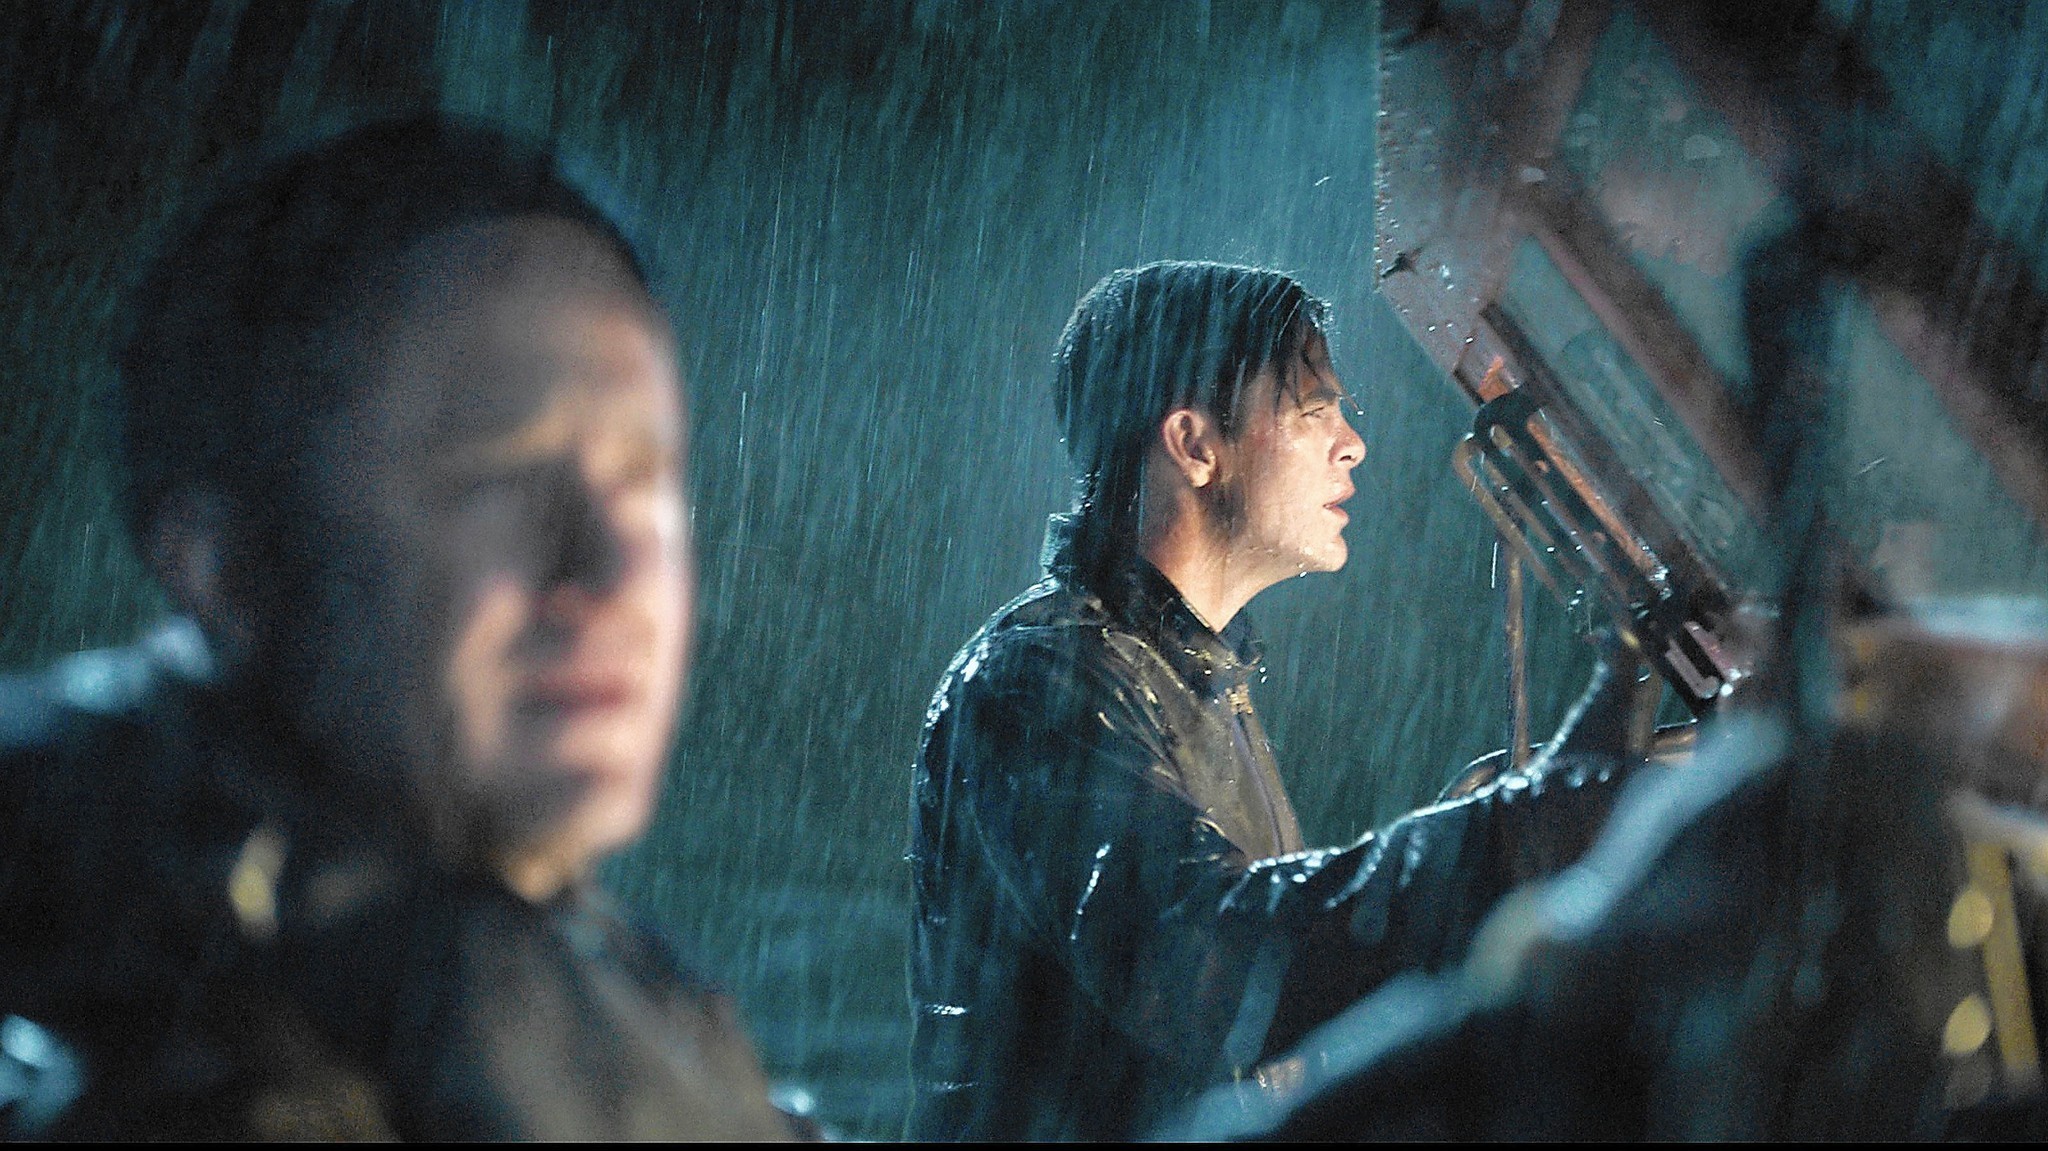 The Finest Hours #23